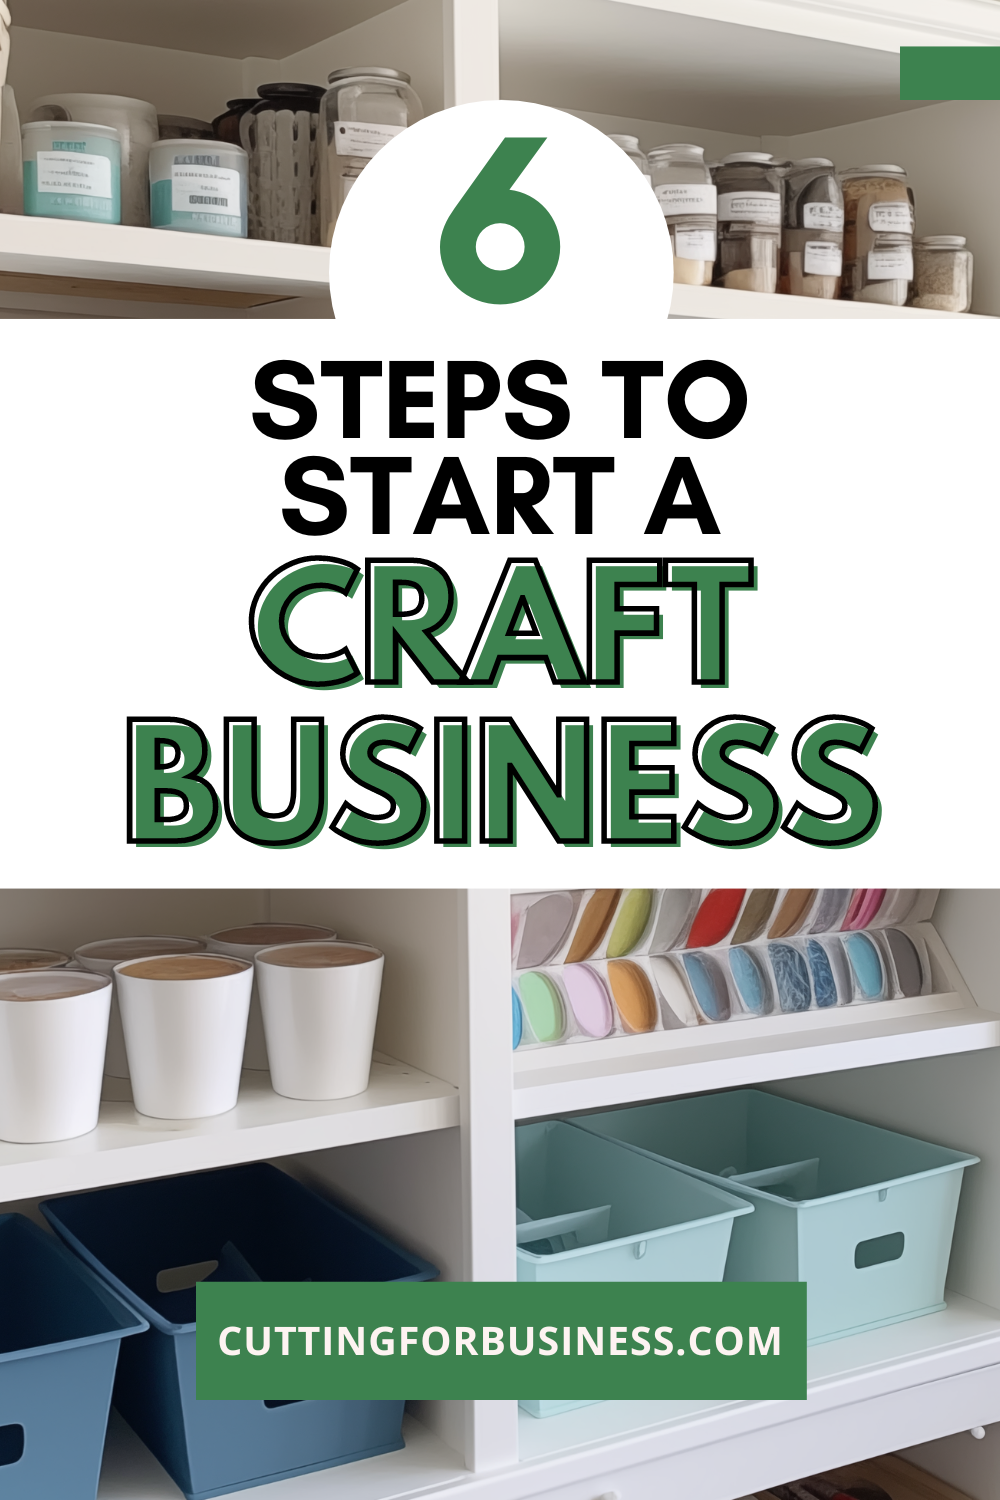 6 Steps to Start a Craft Business - cuttingforbusiness.com